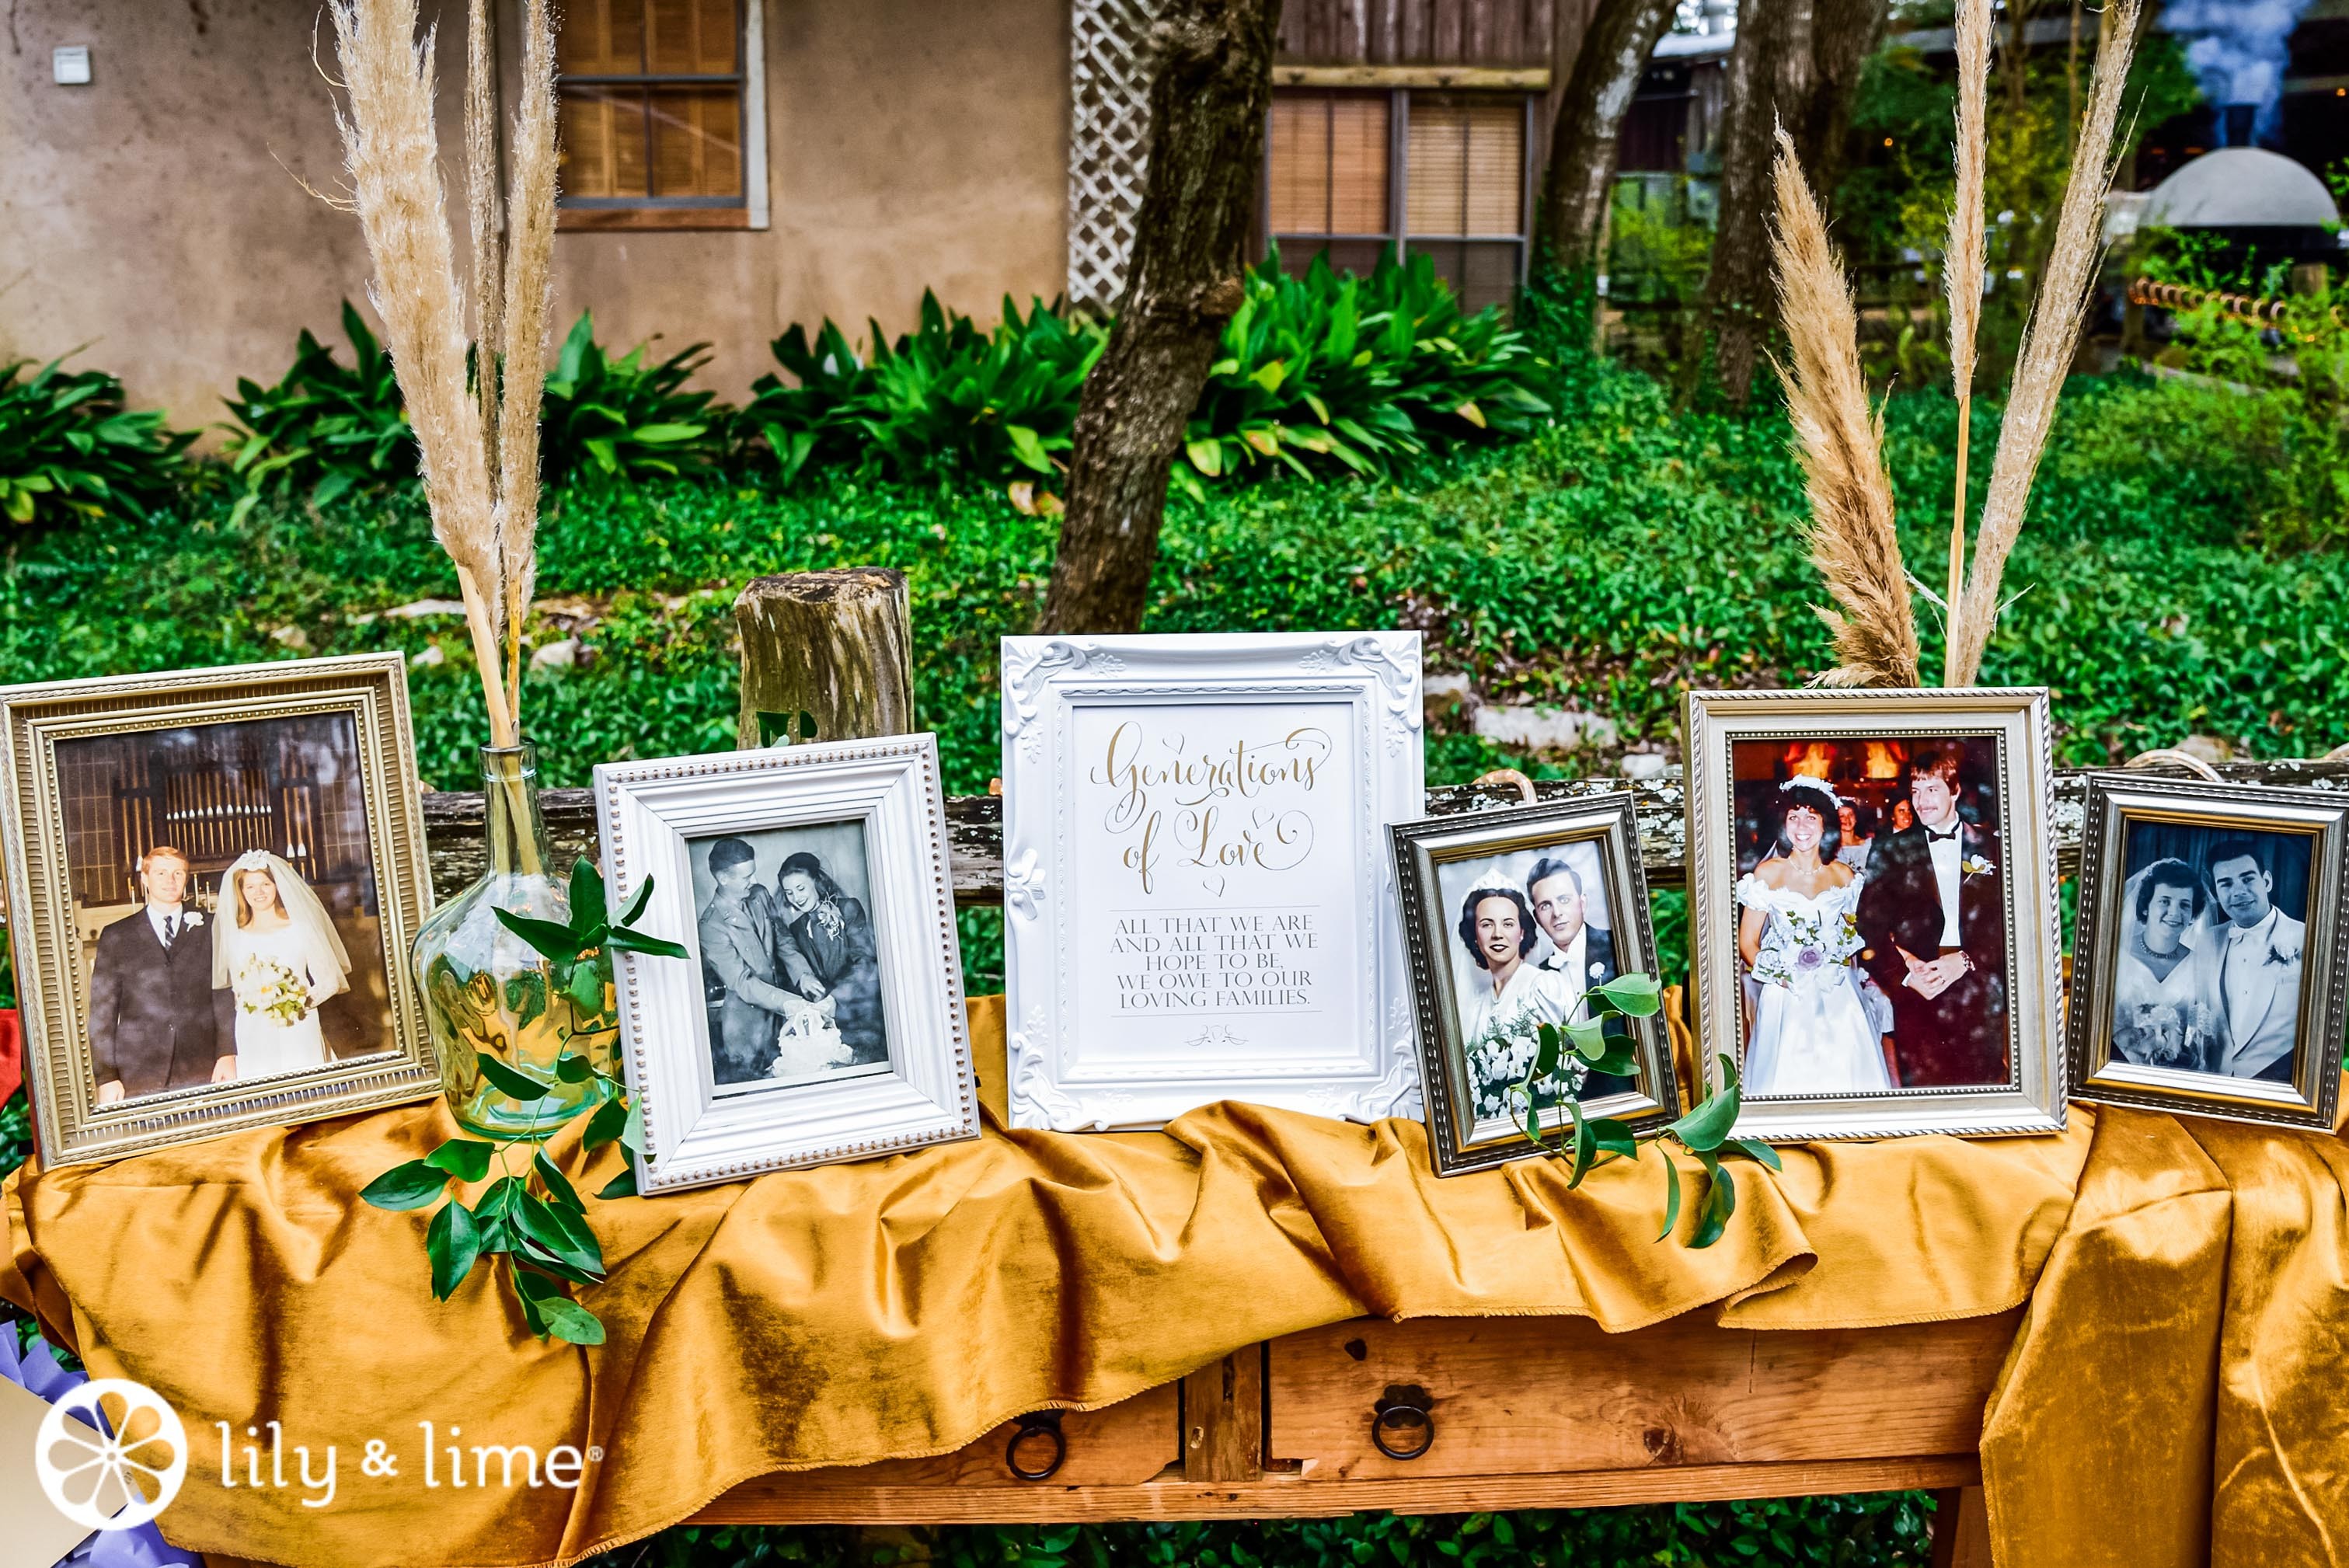 How to Make a Rustic DIY Wedding Photo Booth Sign